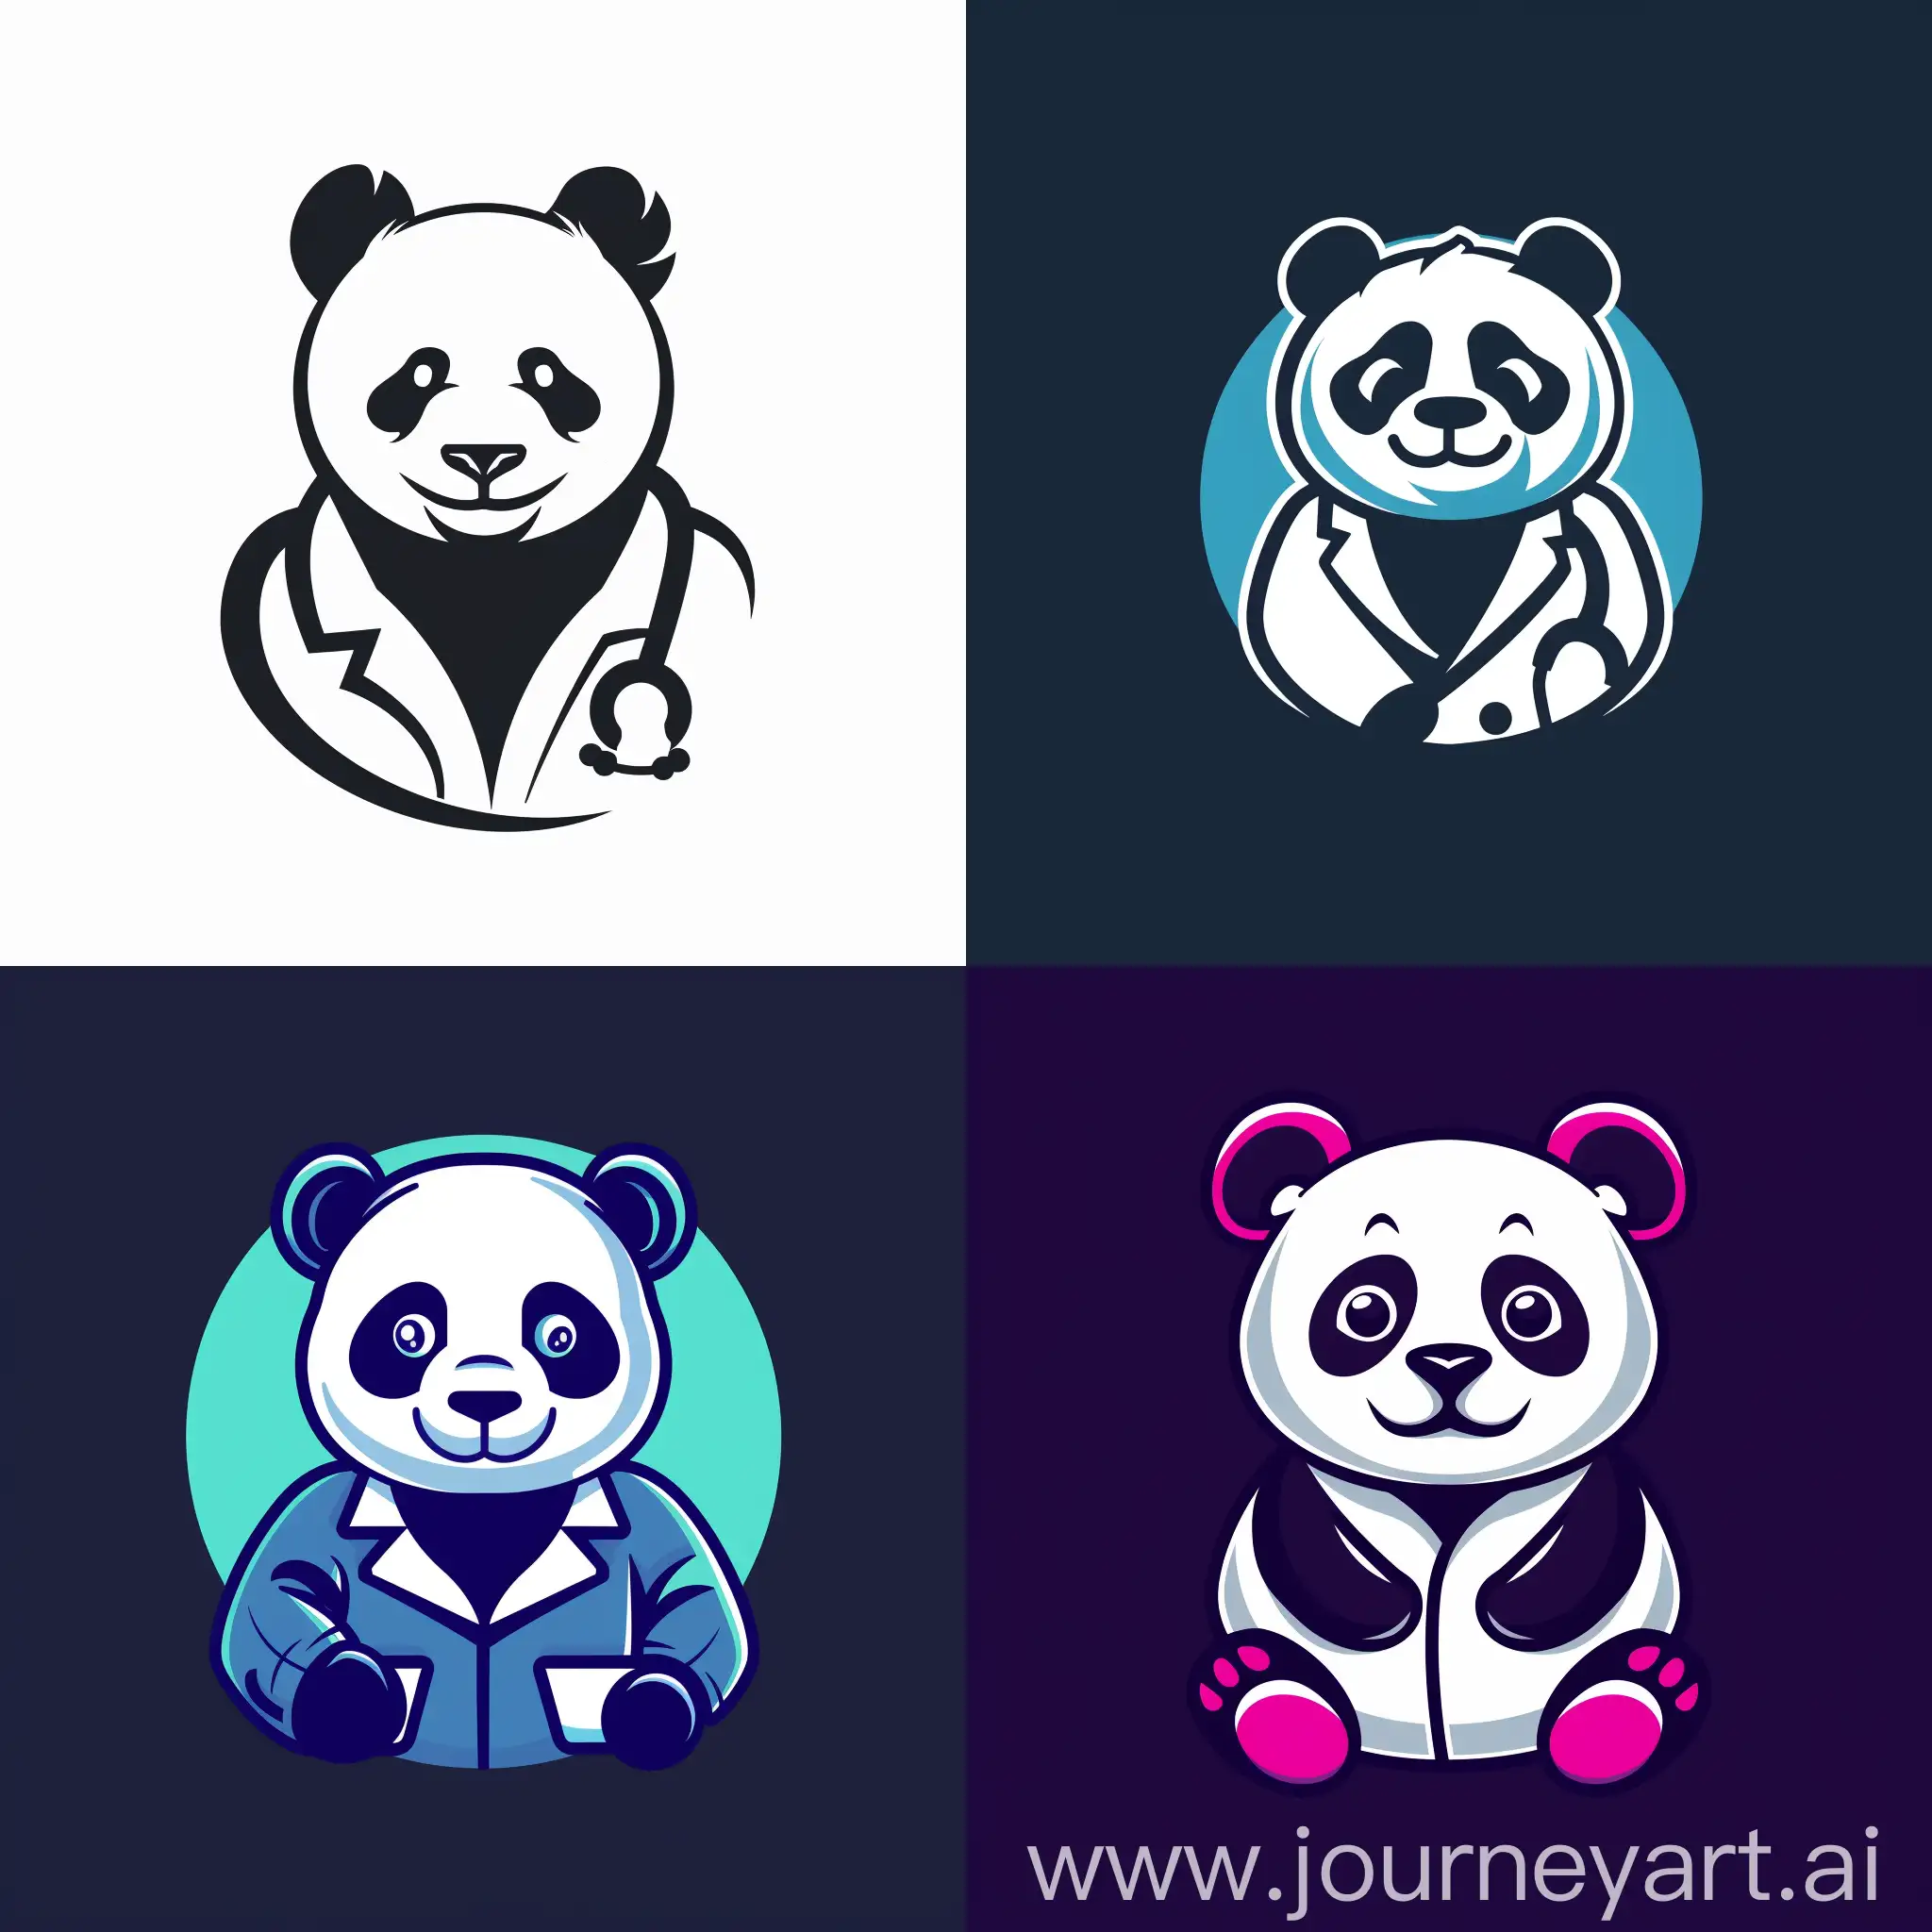 Hello, I want a logo for my project. The name of the project is ... and the symbol of the organization is Panda. Also, this project is related to medical education.